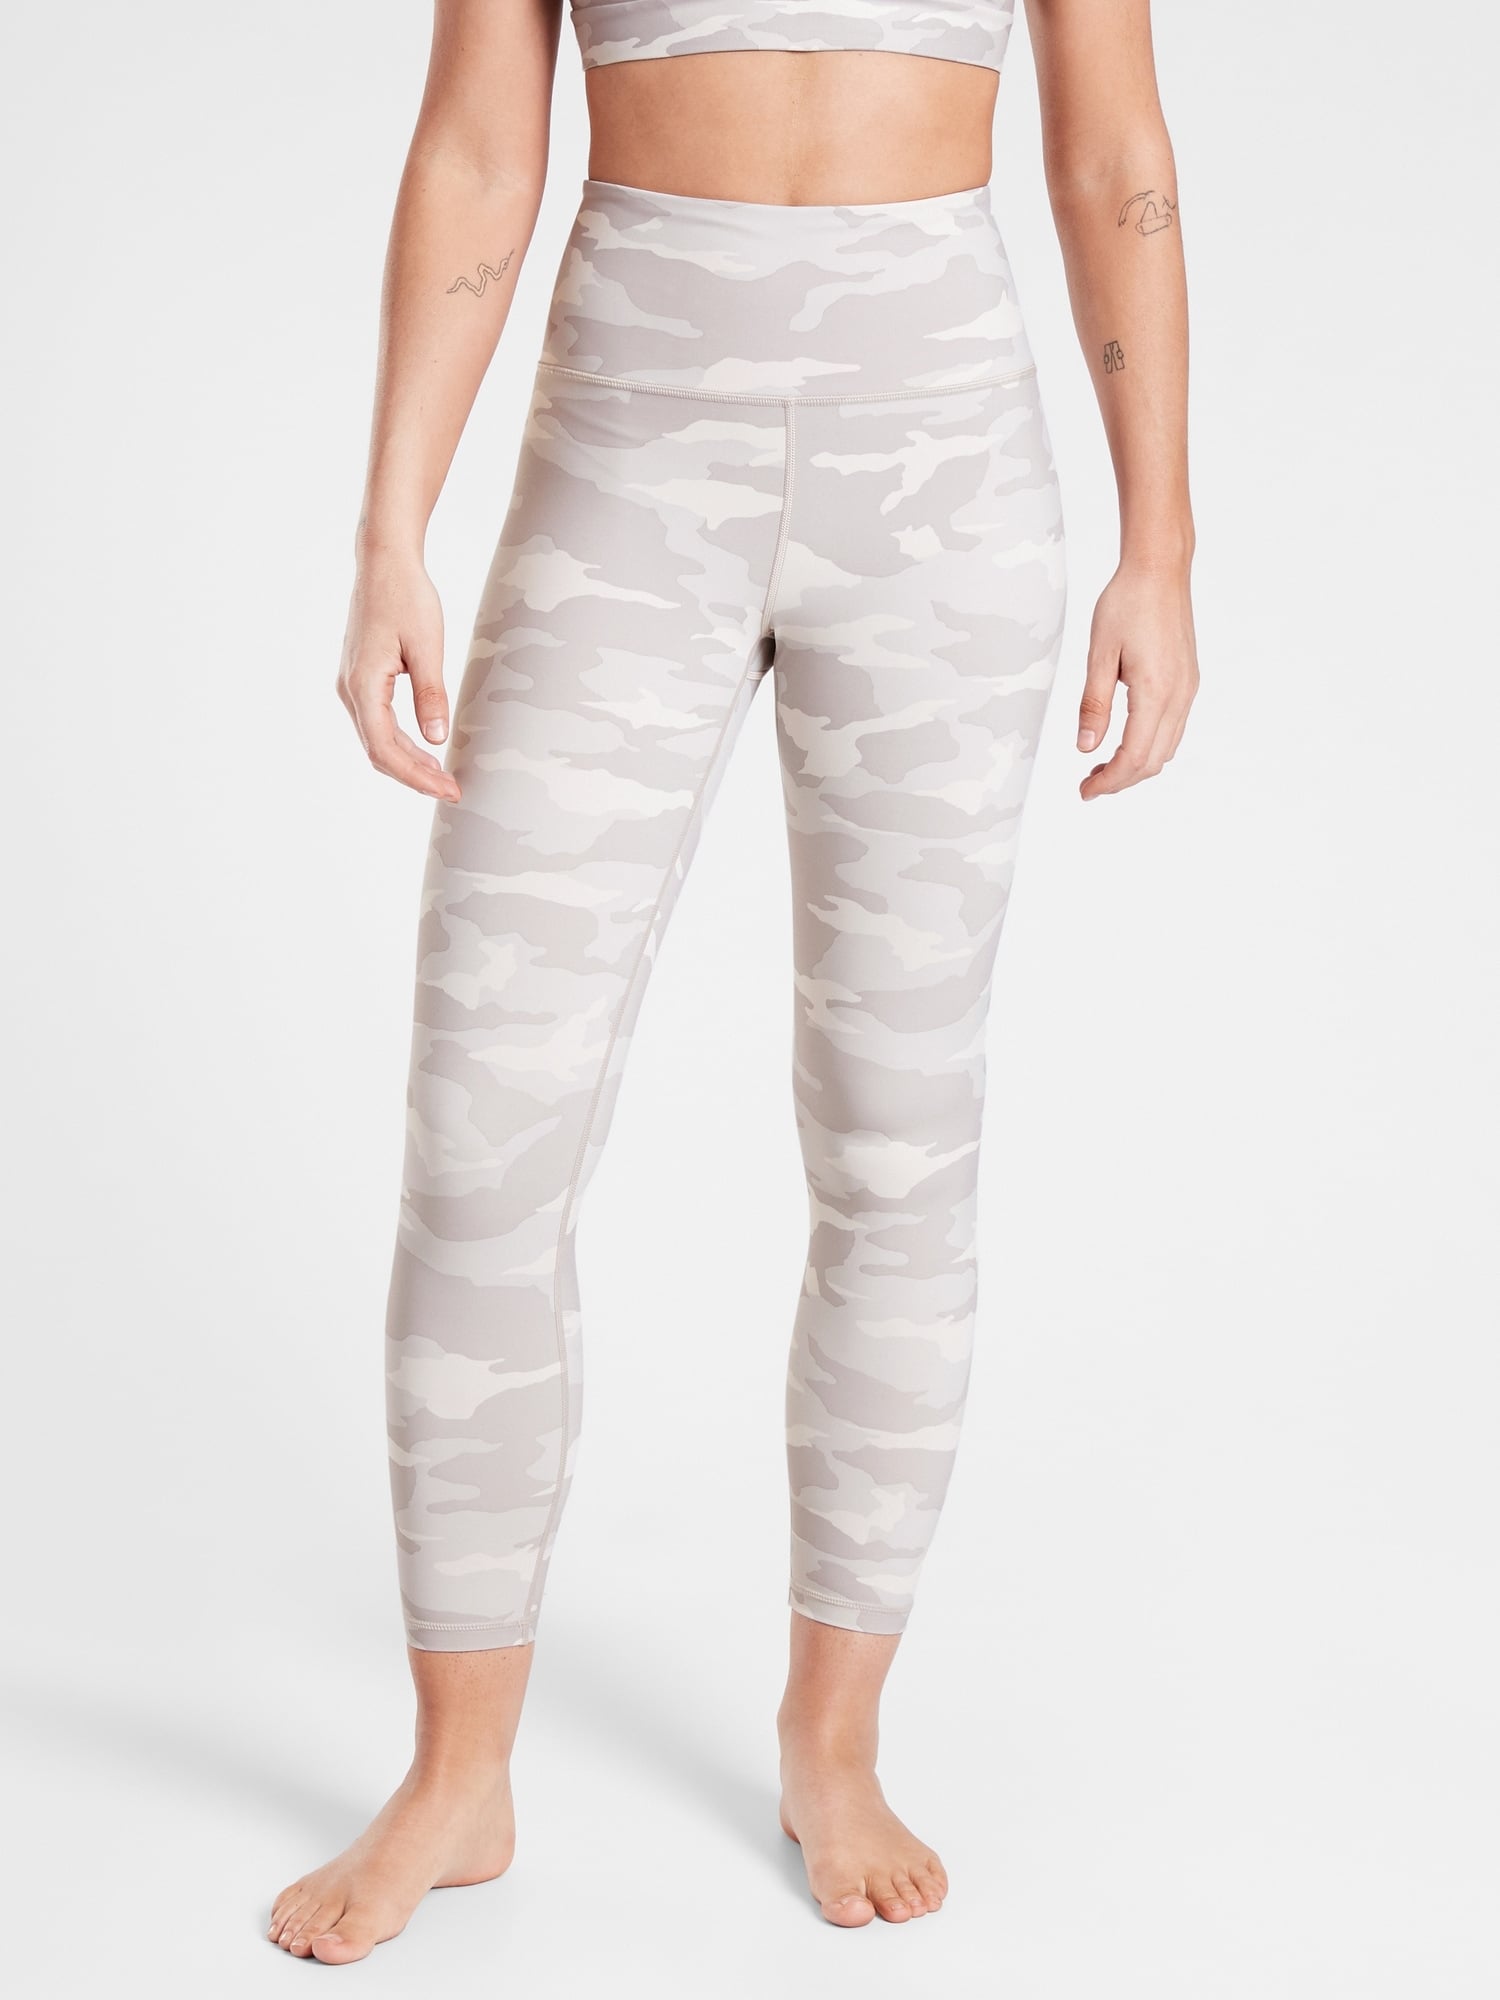 Athleta Elation Camo 7/8 Tight, Gym Class Hero! This Brand Has the Best  Mother-Daughter Fitness Sets